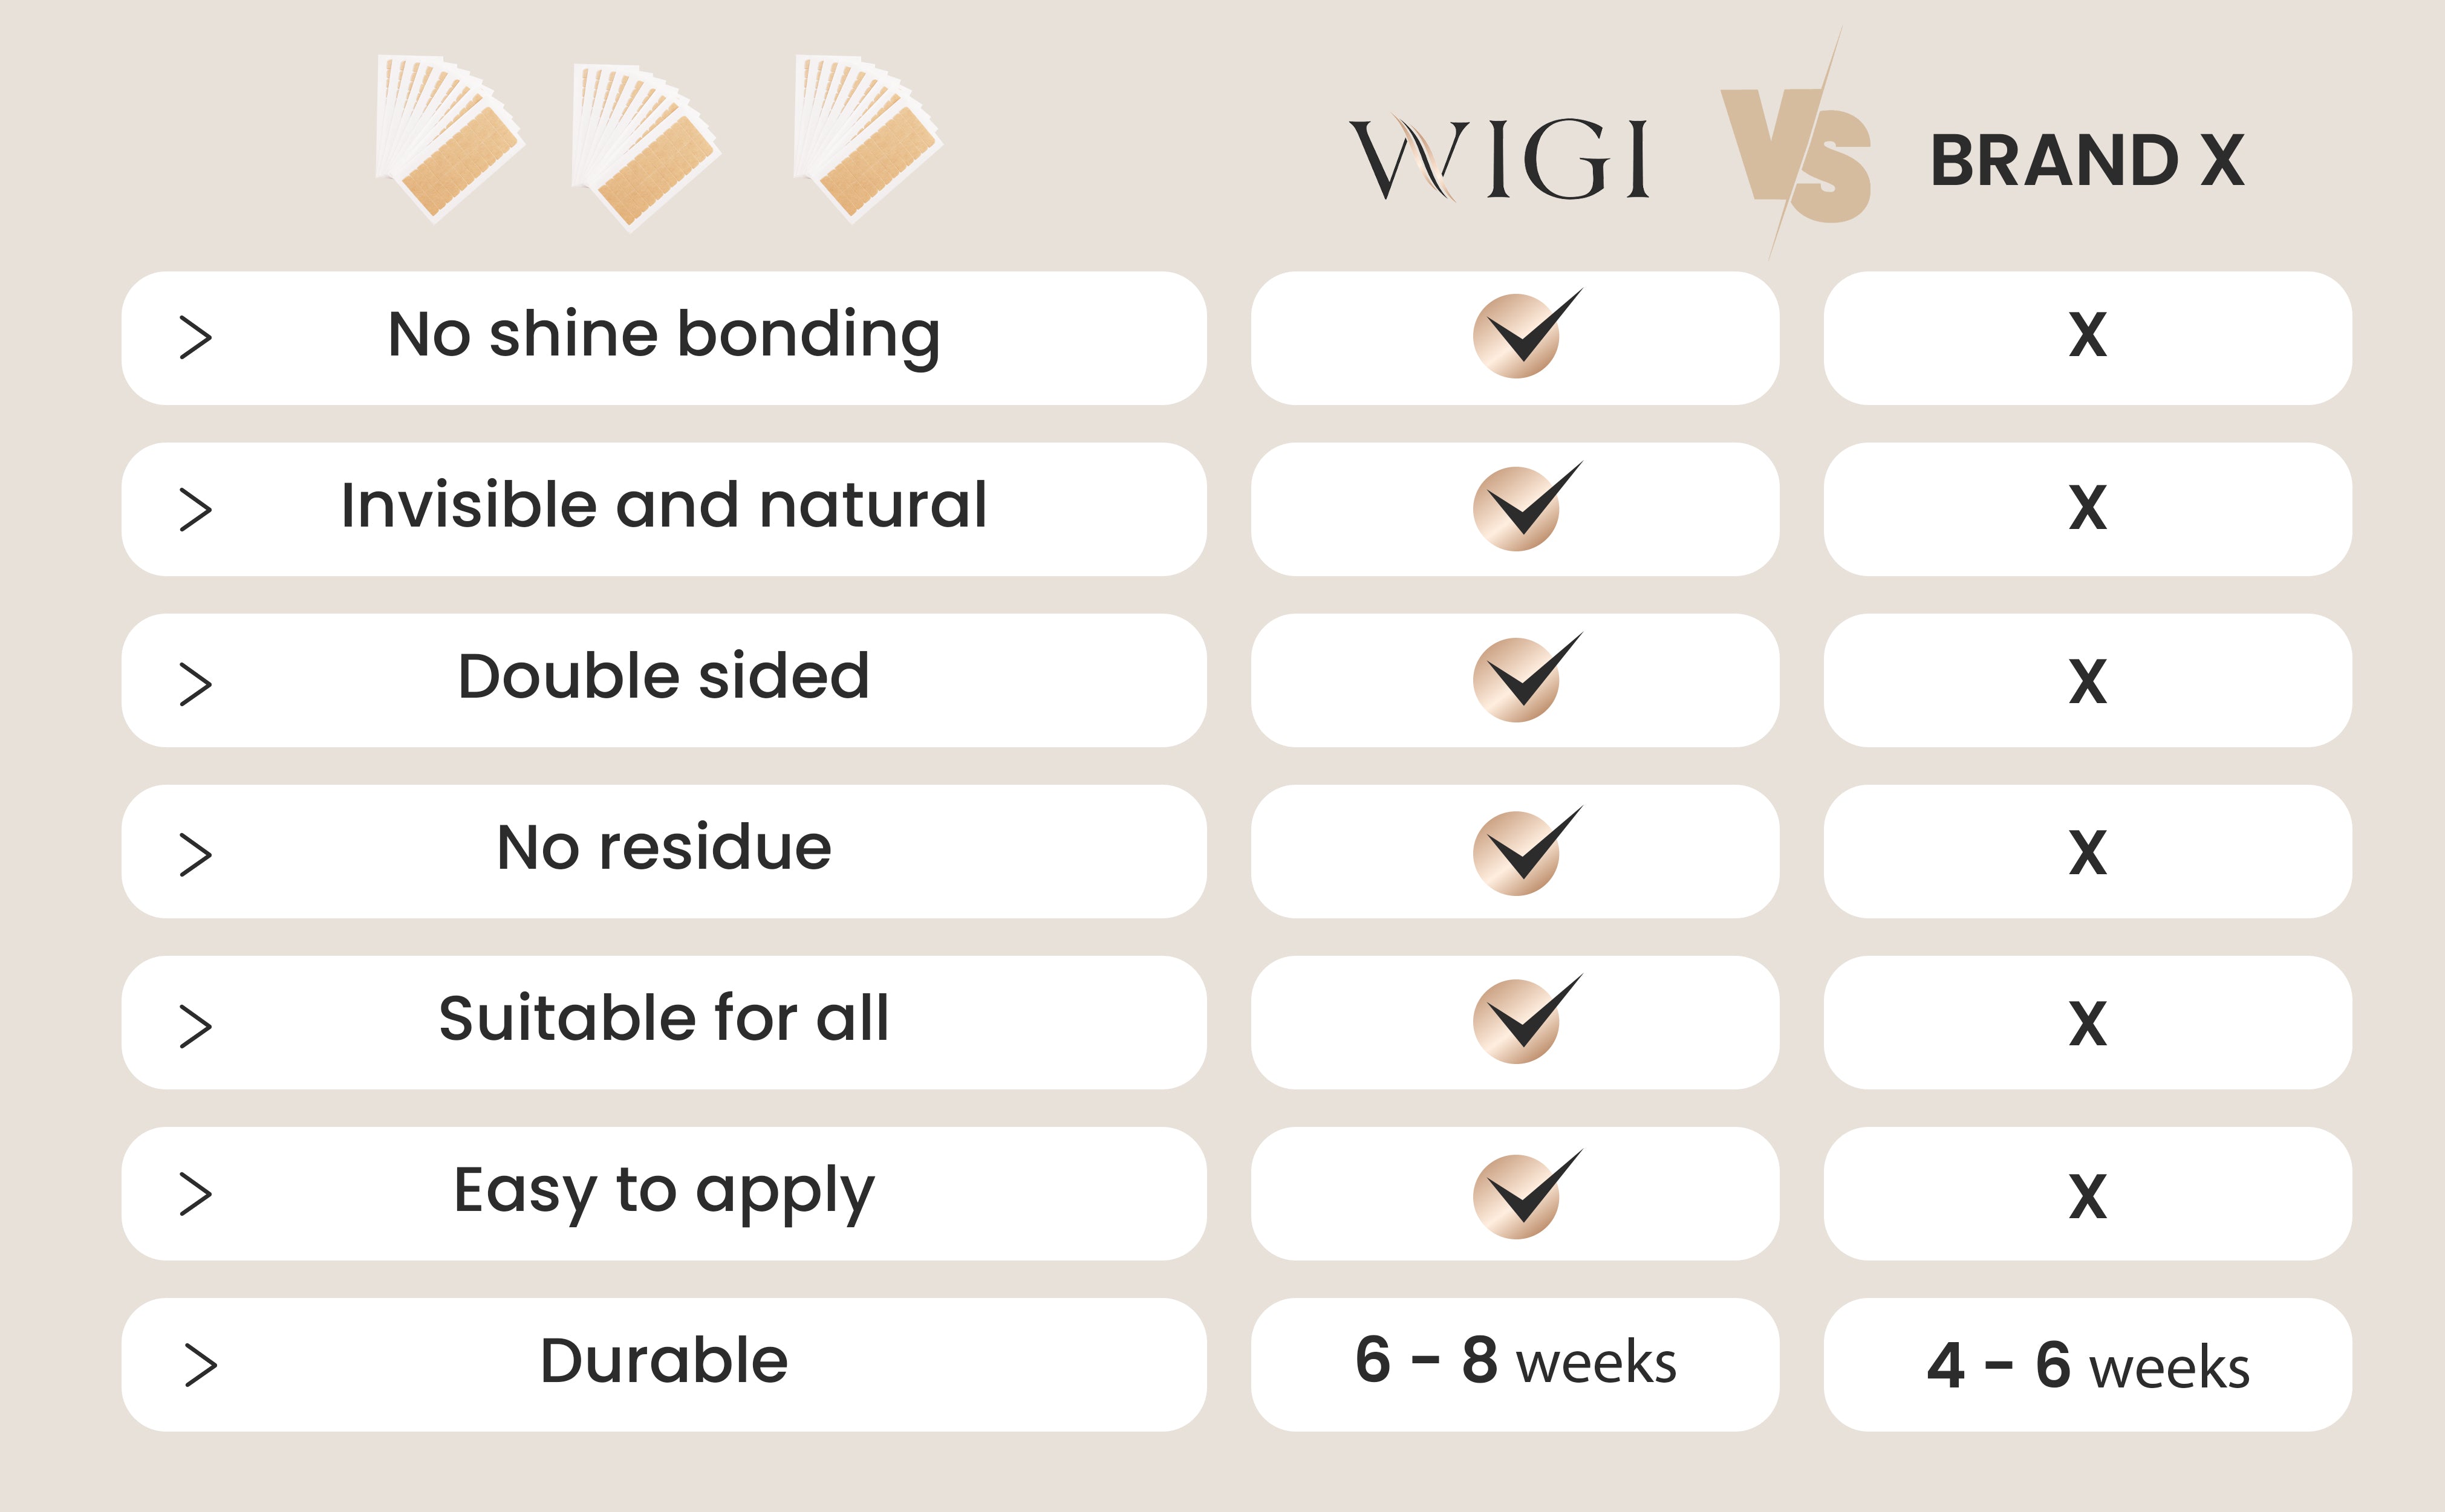 WIGI Premium hair extensions, tape in extensions, hair accessories, personal care products 